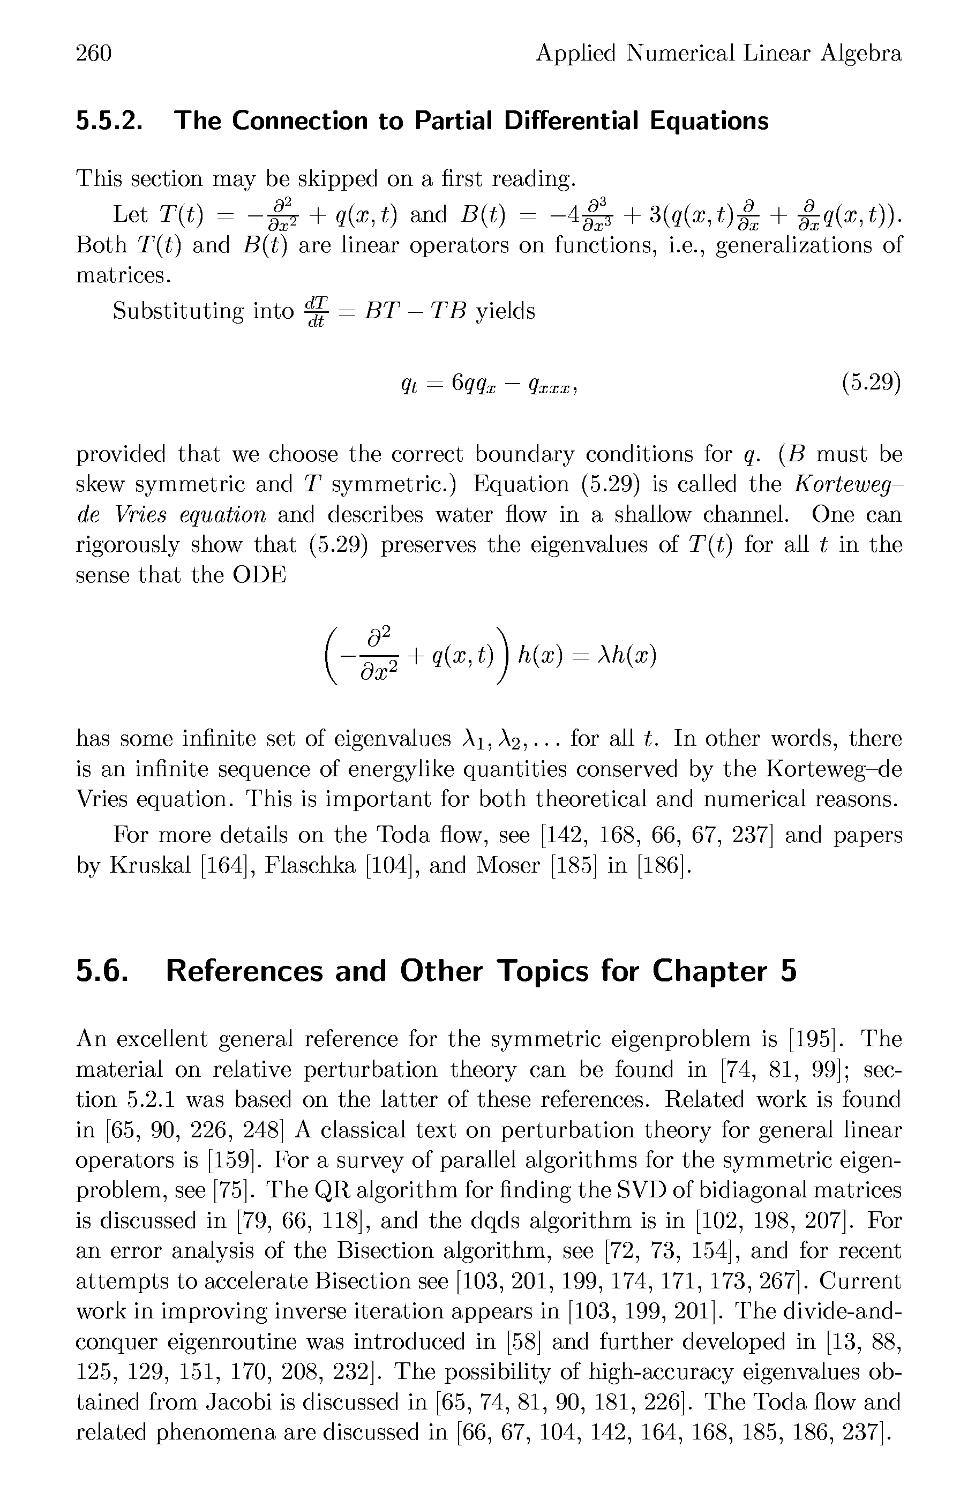 5.5.2 The Connection to Partial Differential Equations
5.6 References and Other Topics for Chapter 5